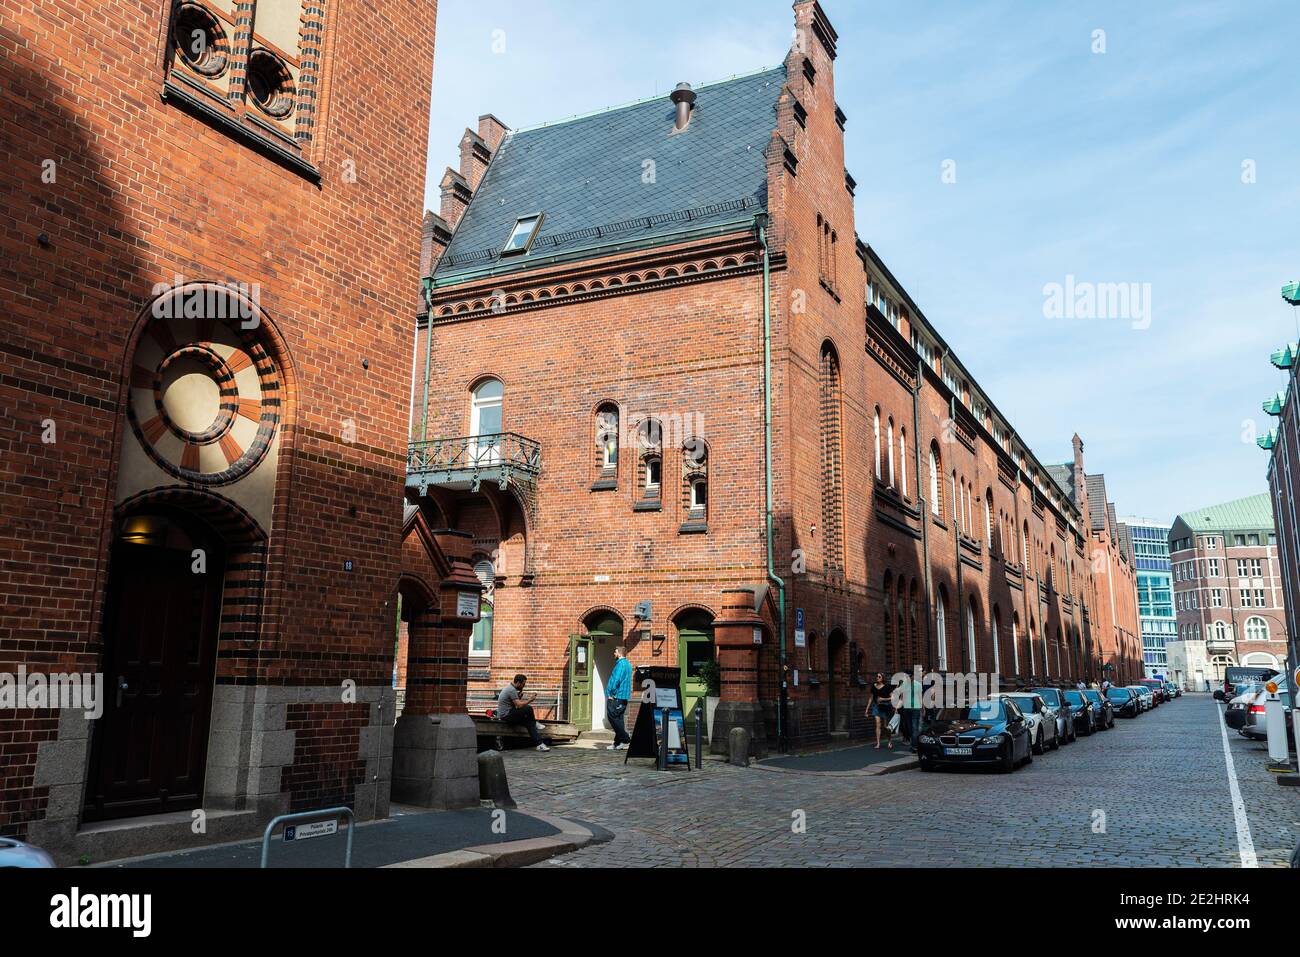 Hamburg, Germany - August 23, 2019: Old warehouses converted into offices and flats with people around in HafenCity, Hamburg, Germany Stock Photo